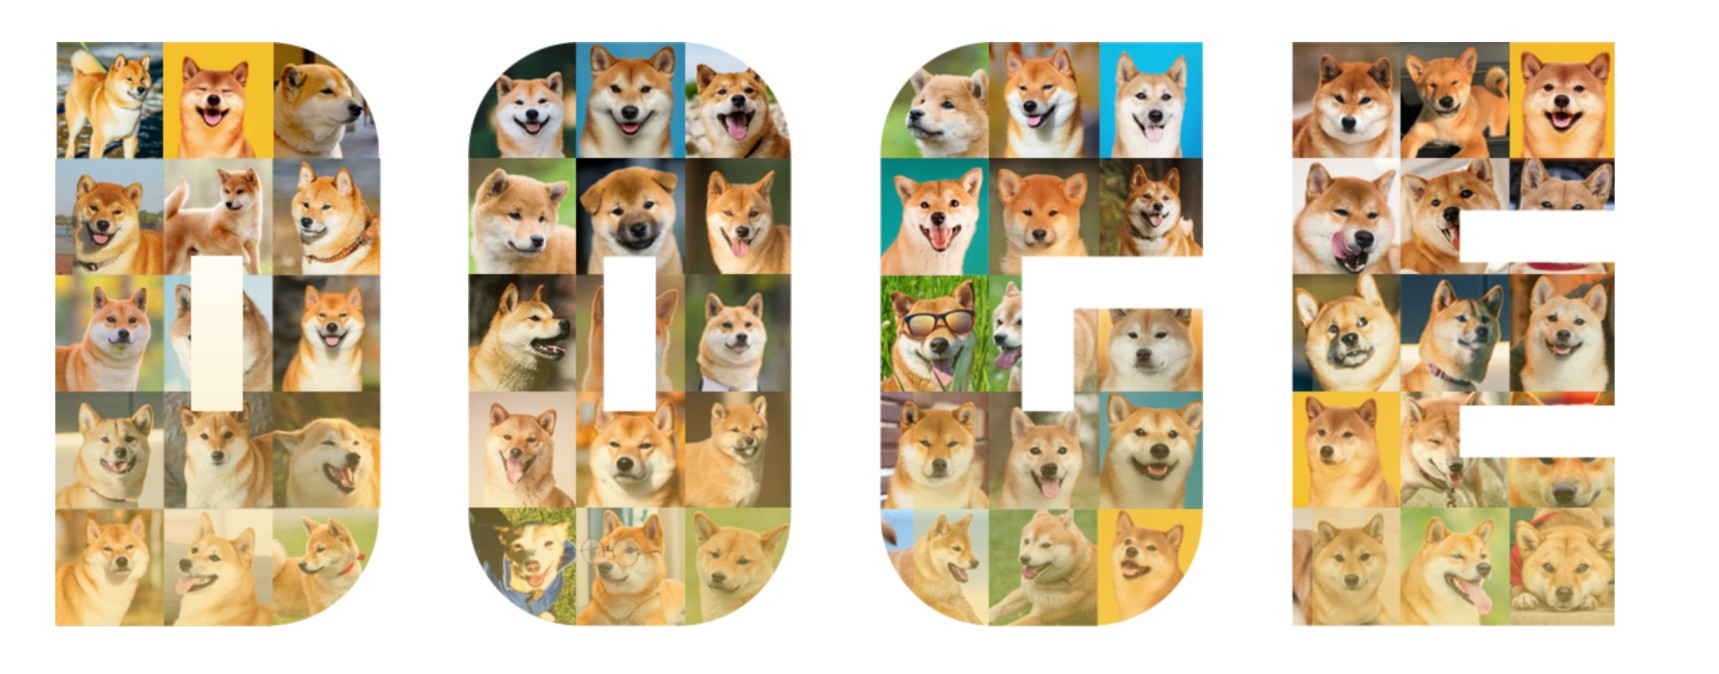 DRC-20 and Dogecoin ecosystem 